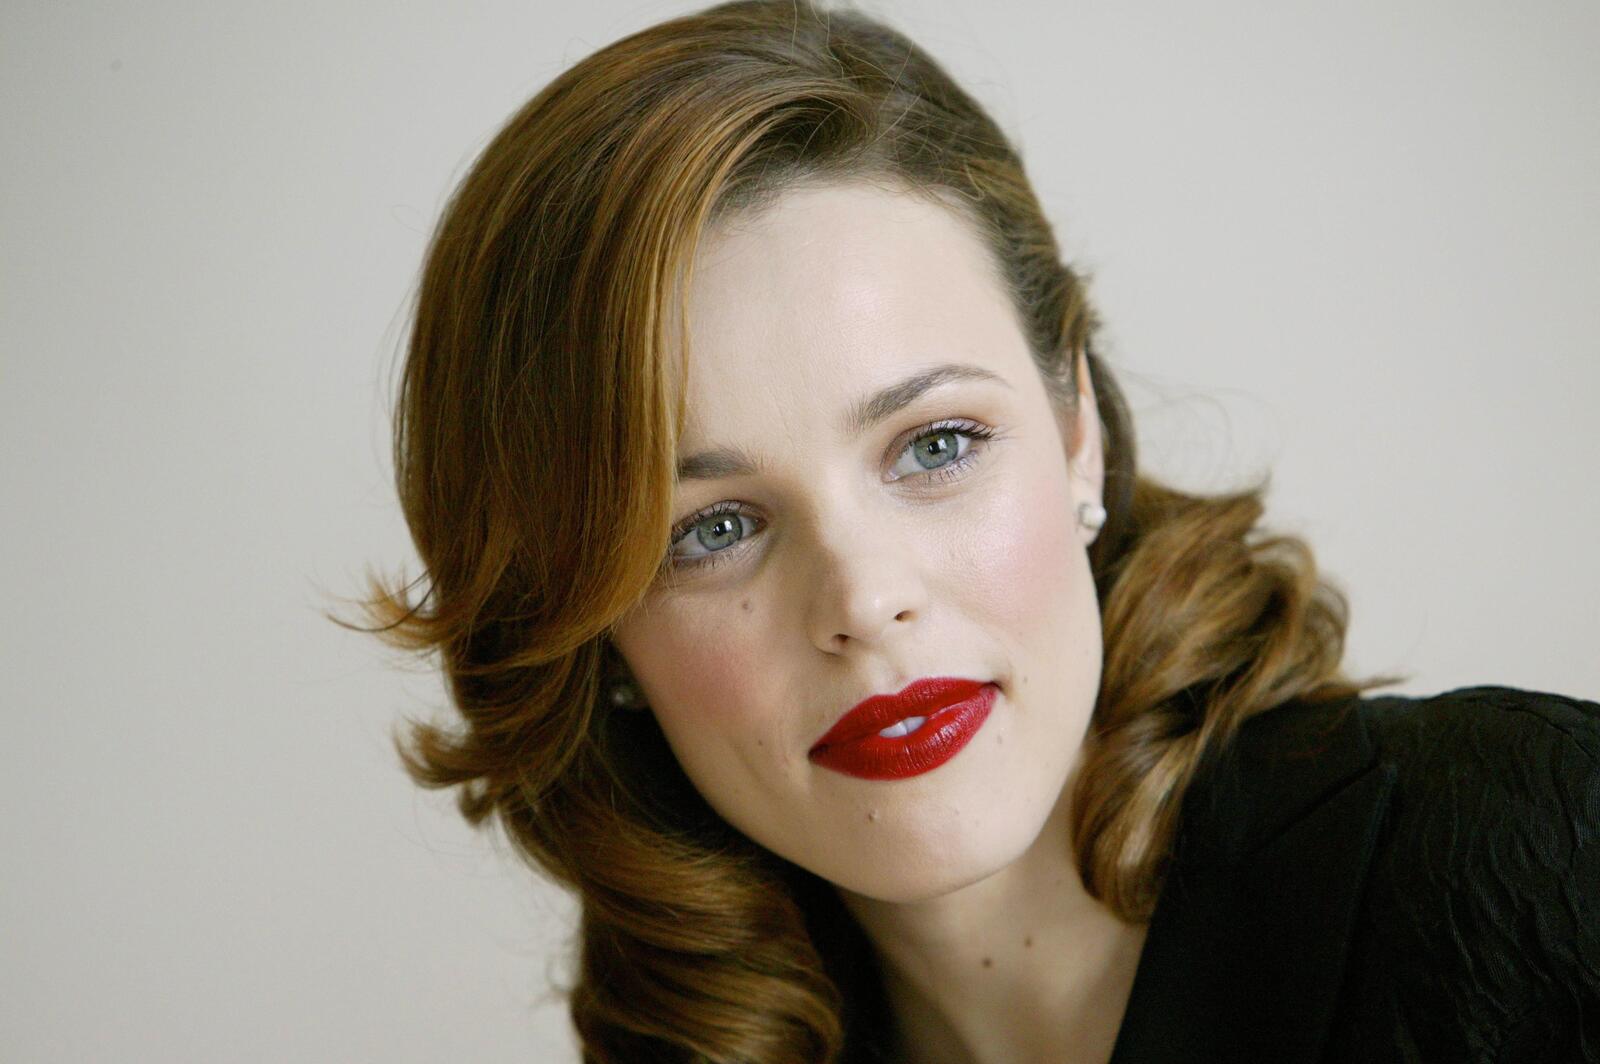 Free photo Rachel McAdams with red hair and red lipstick on her lips